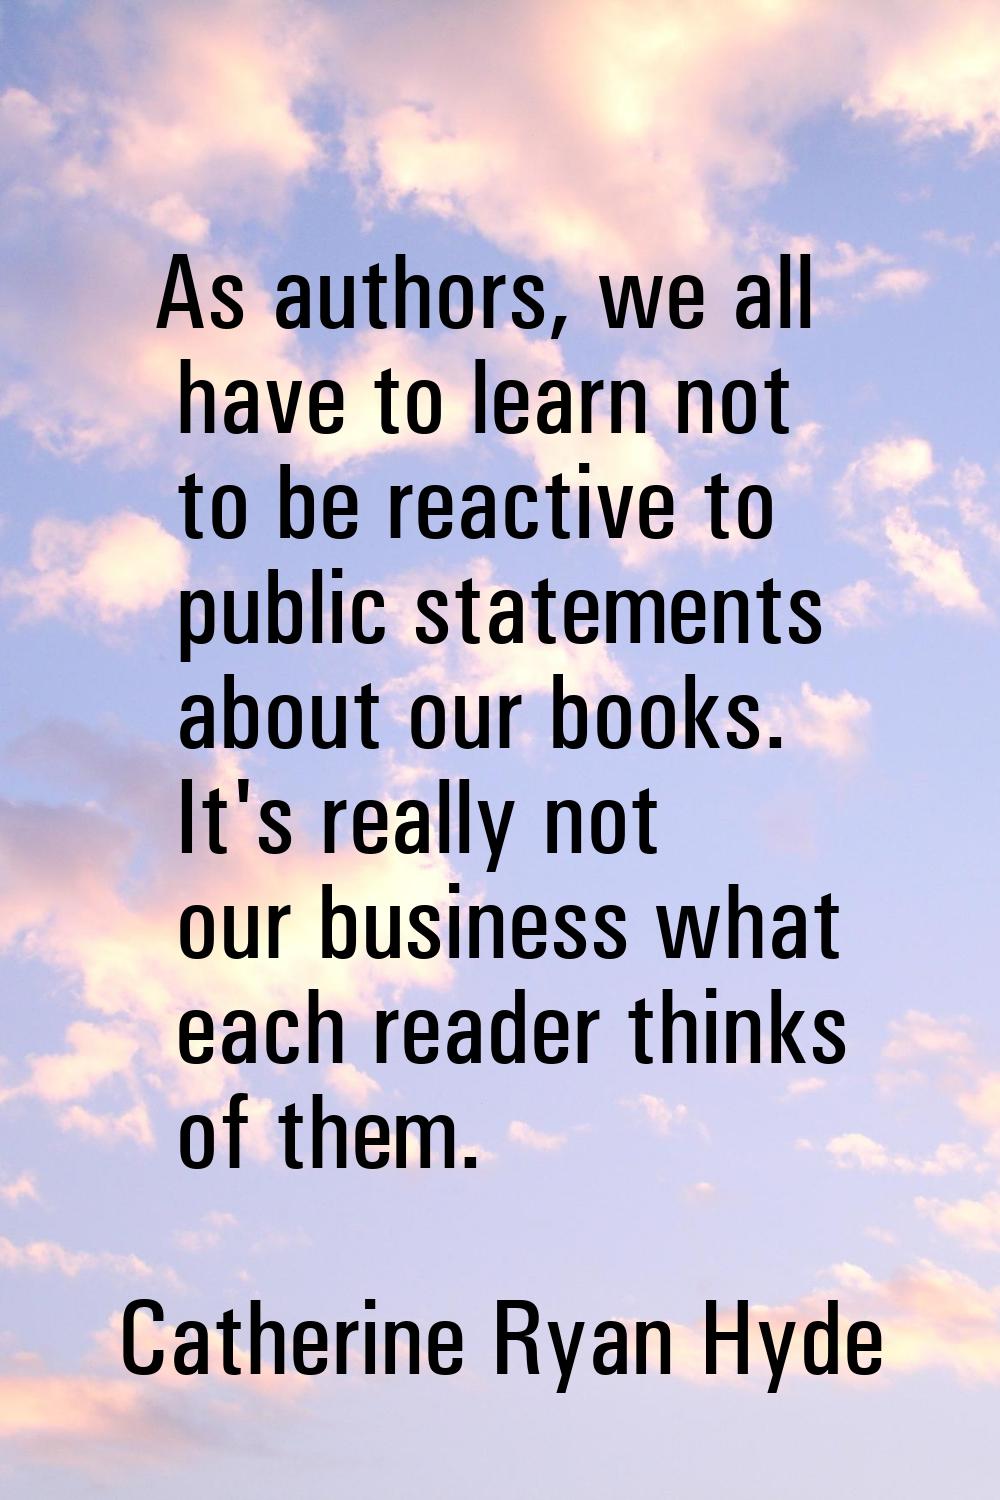 As authors, we all have to learn not to be reactive to public statements about our books. It's real